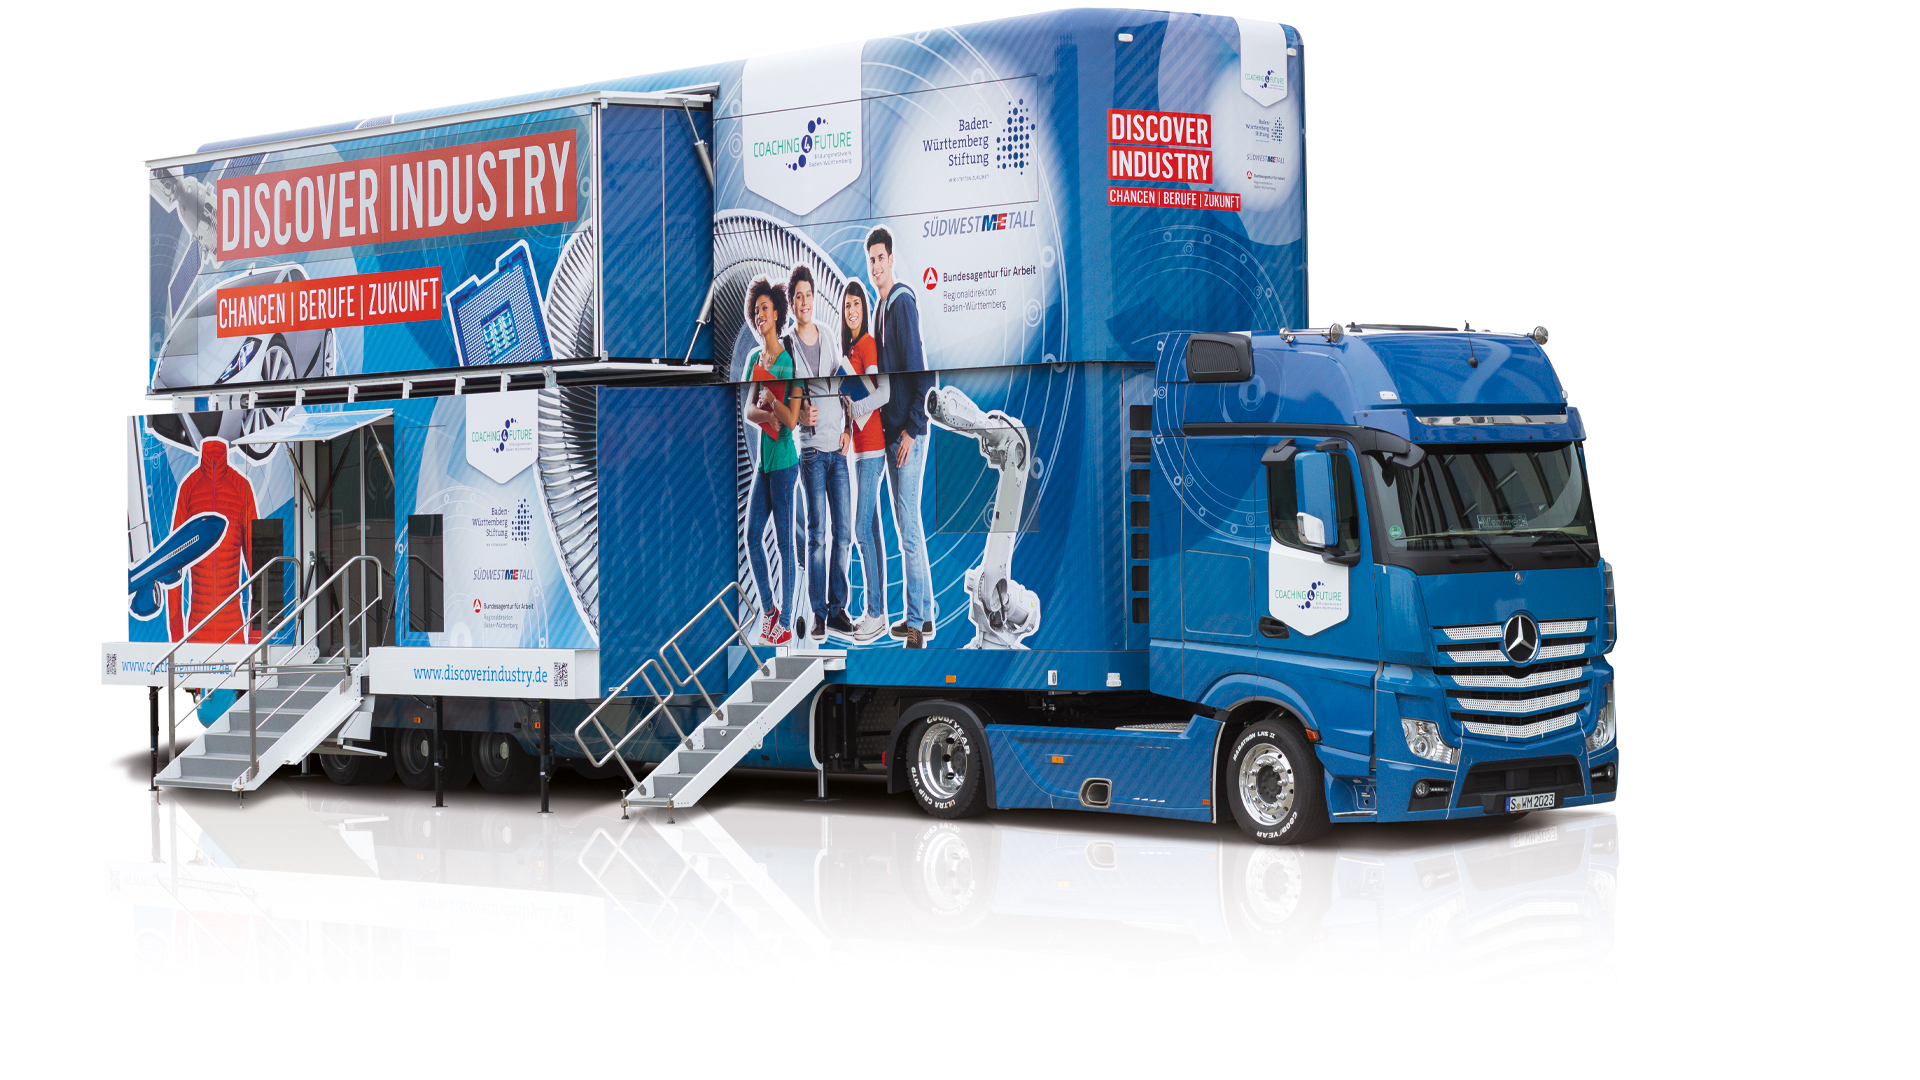 DISCOVER INDUSTRY Roadshow Truck